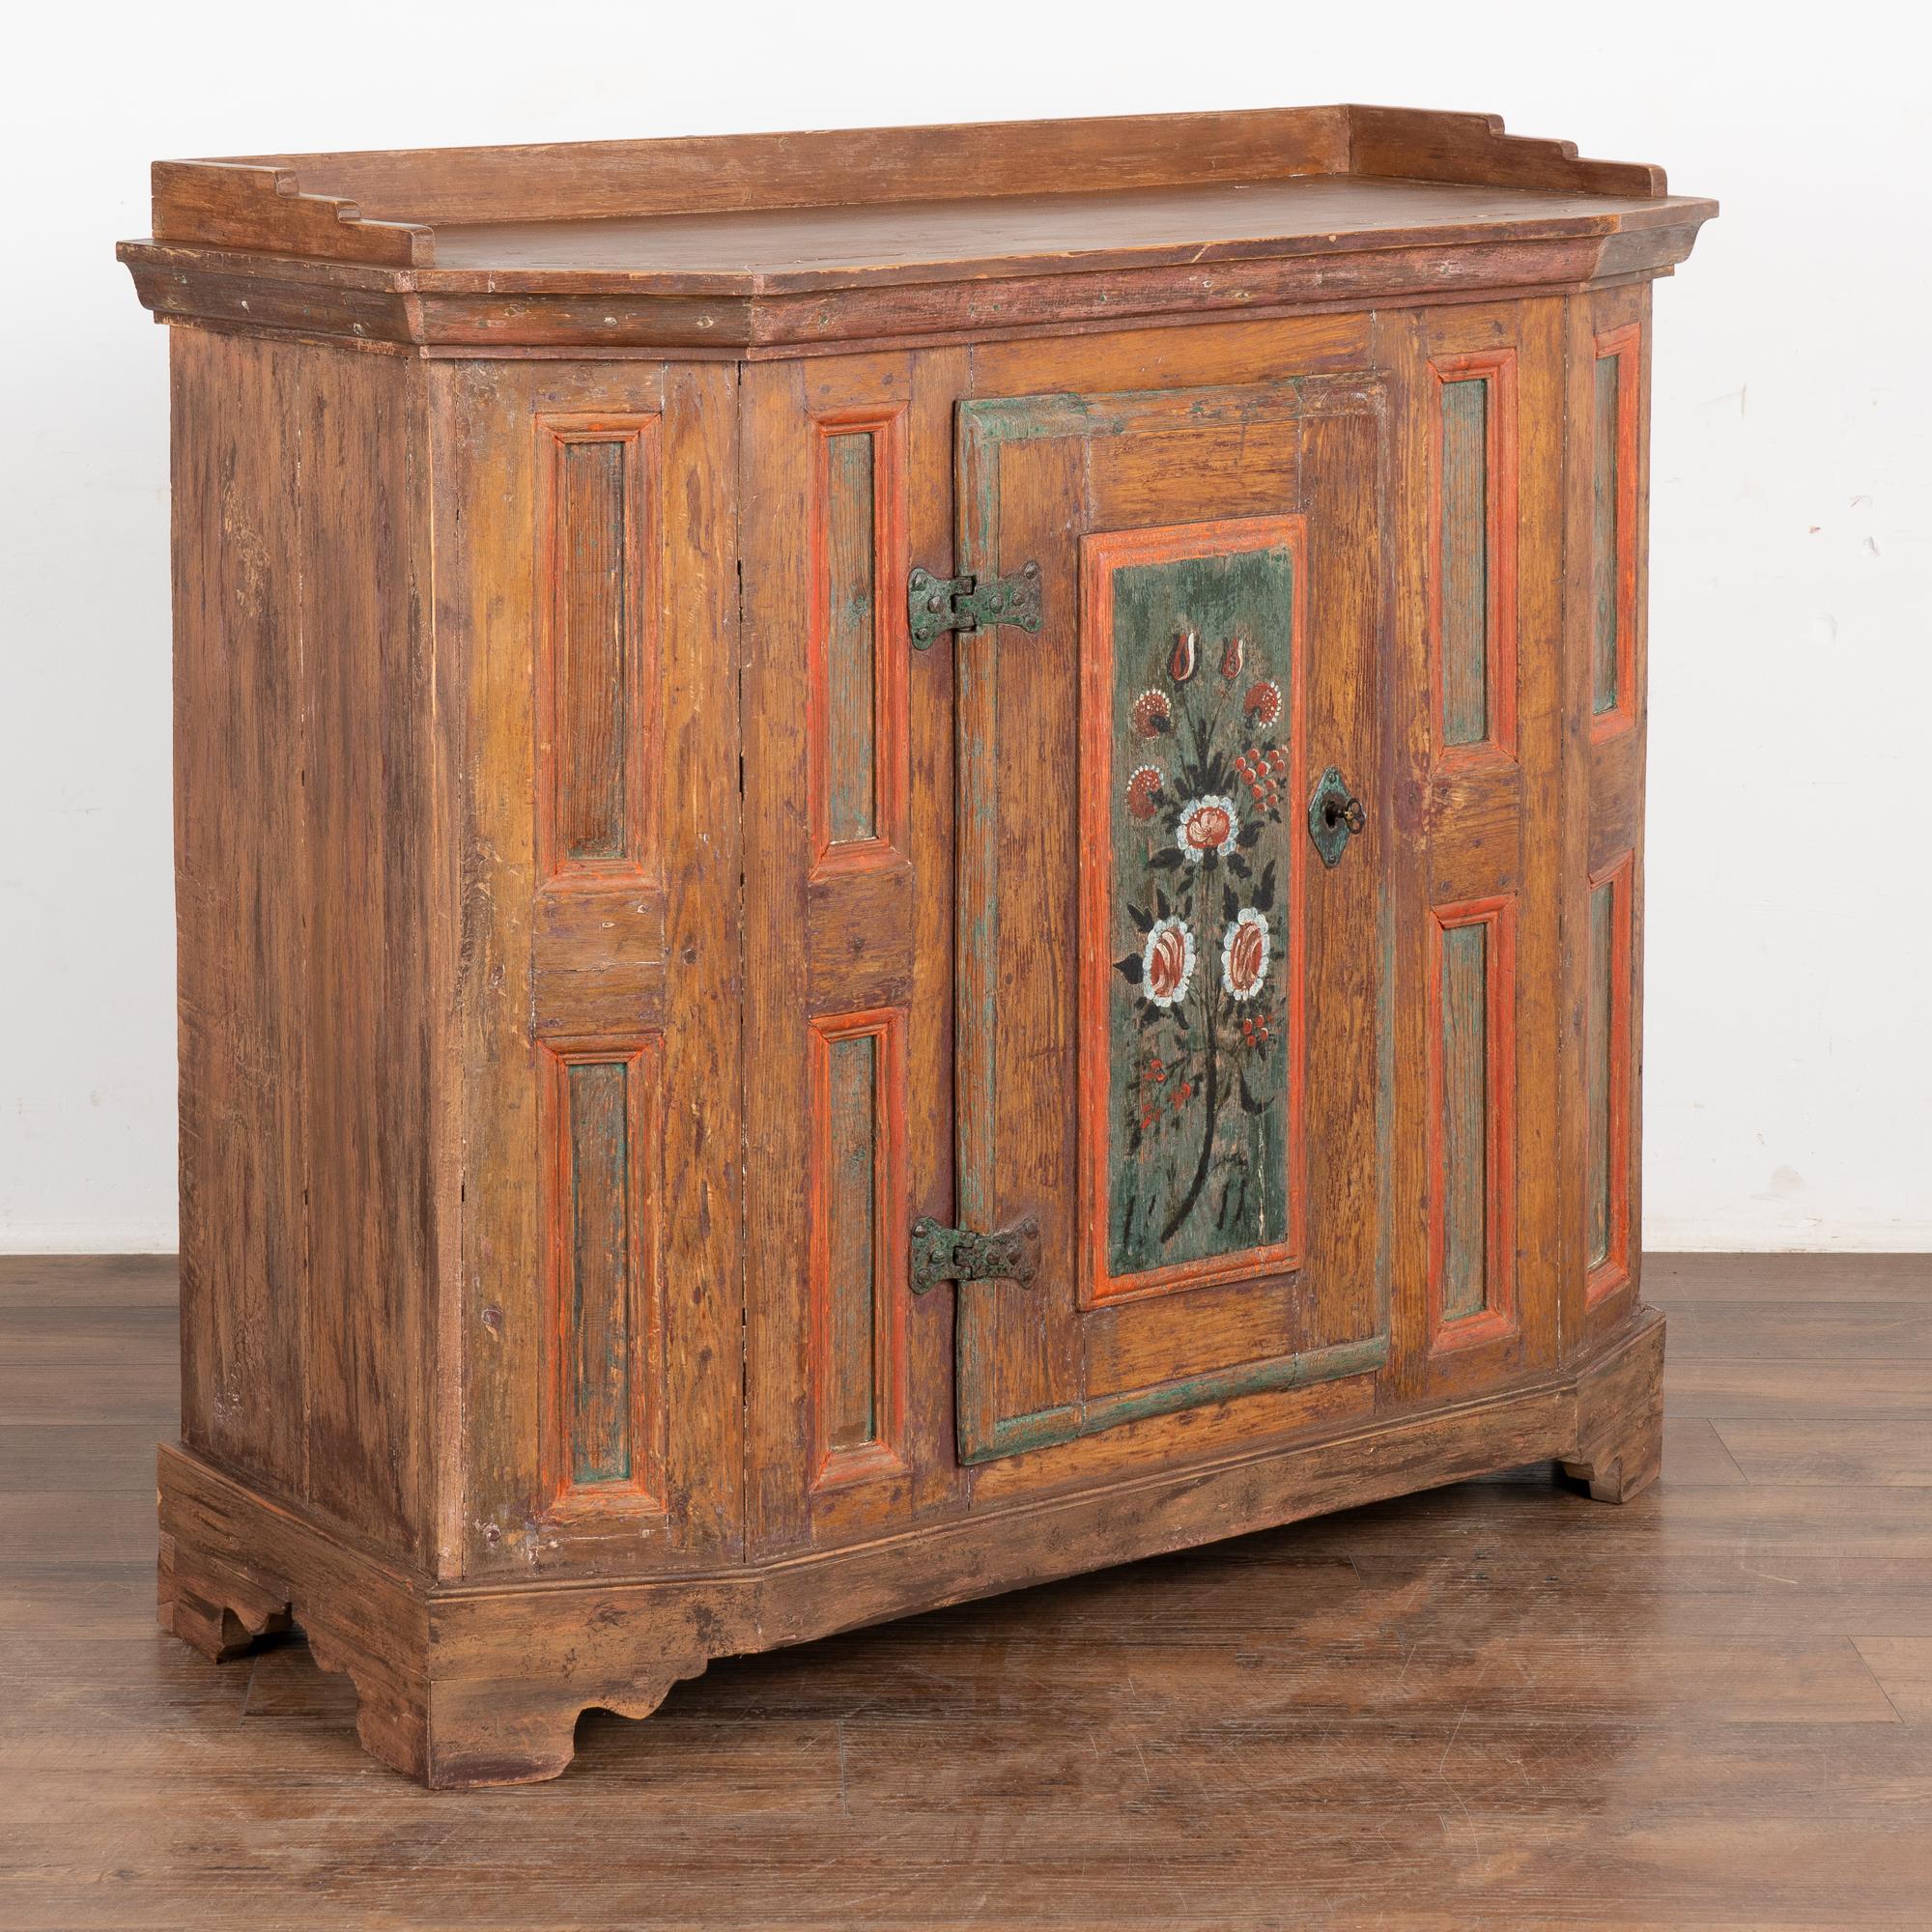 This cabinet is a charming representation of early 19th century Swedish craftsmanship, from both the cabinet maker and the painter that created it. The aged patina of the painted finish draws one to it.
The single panel door is painted with a